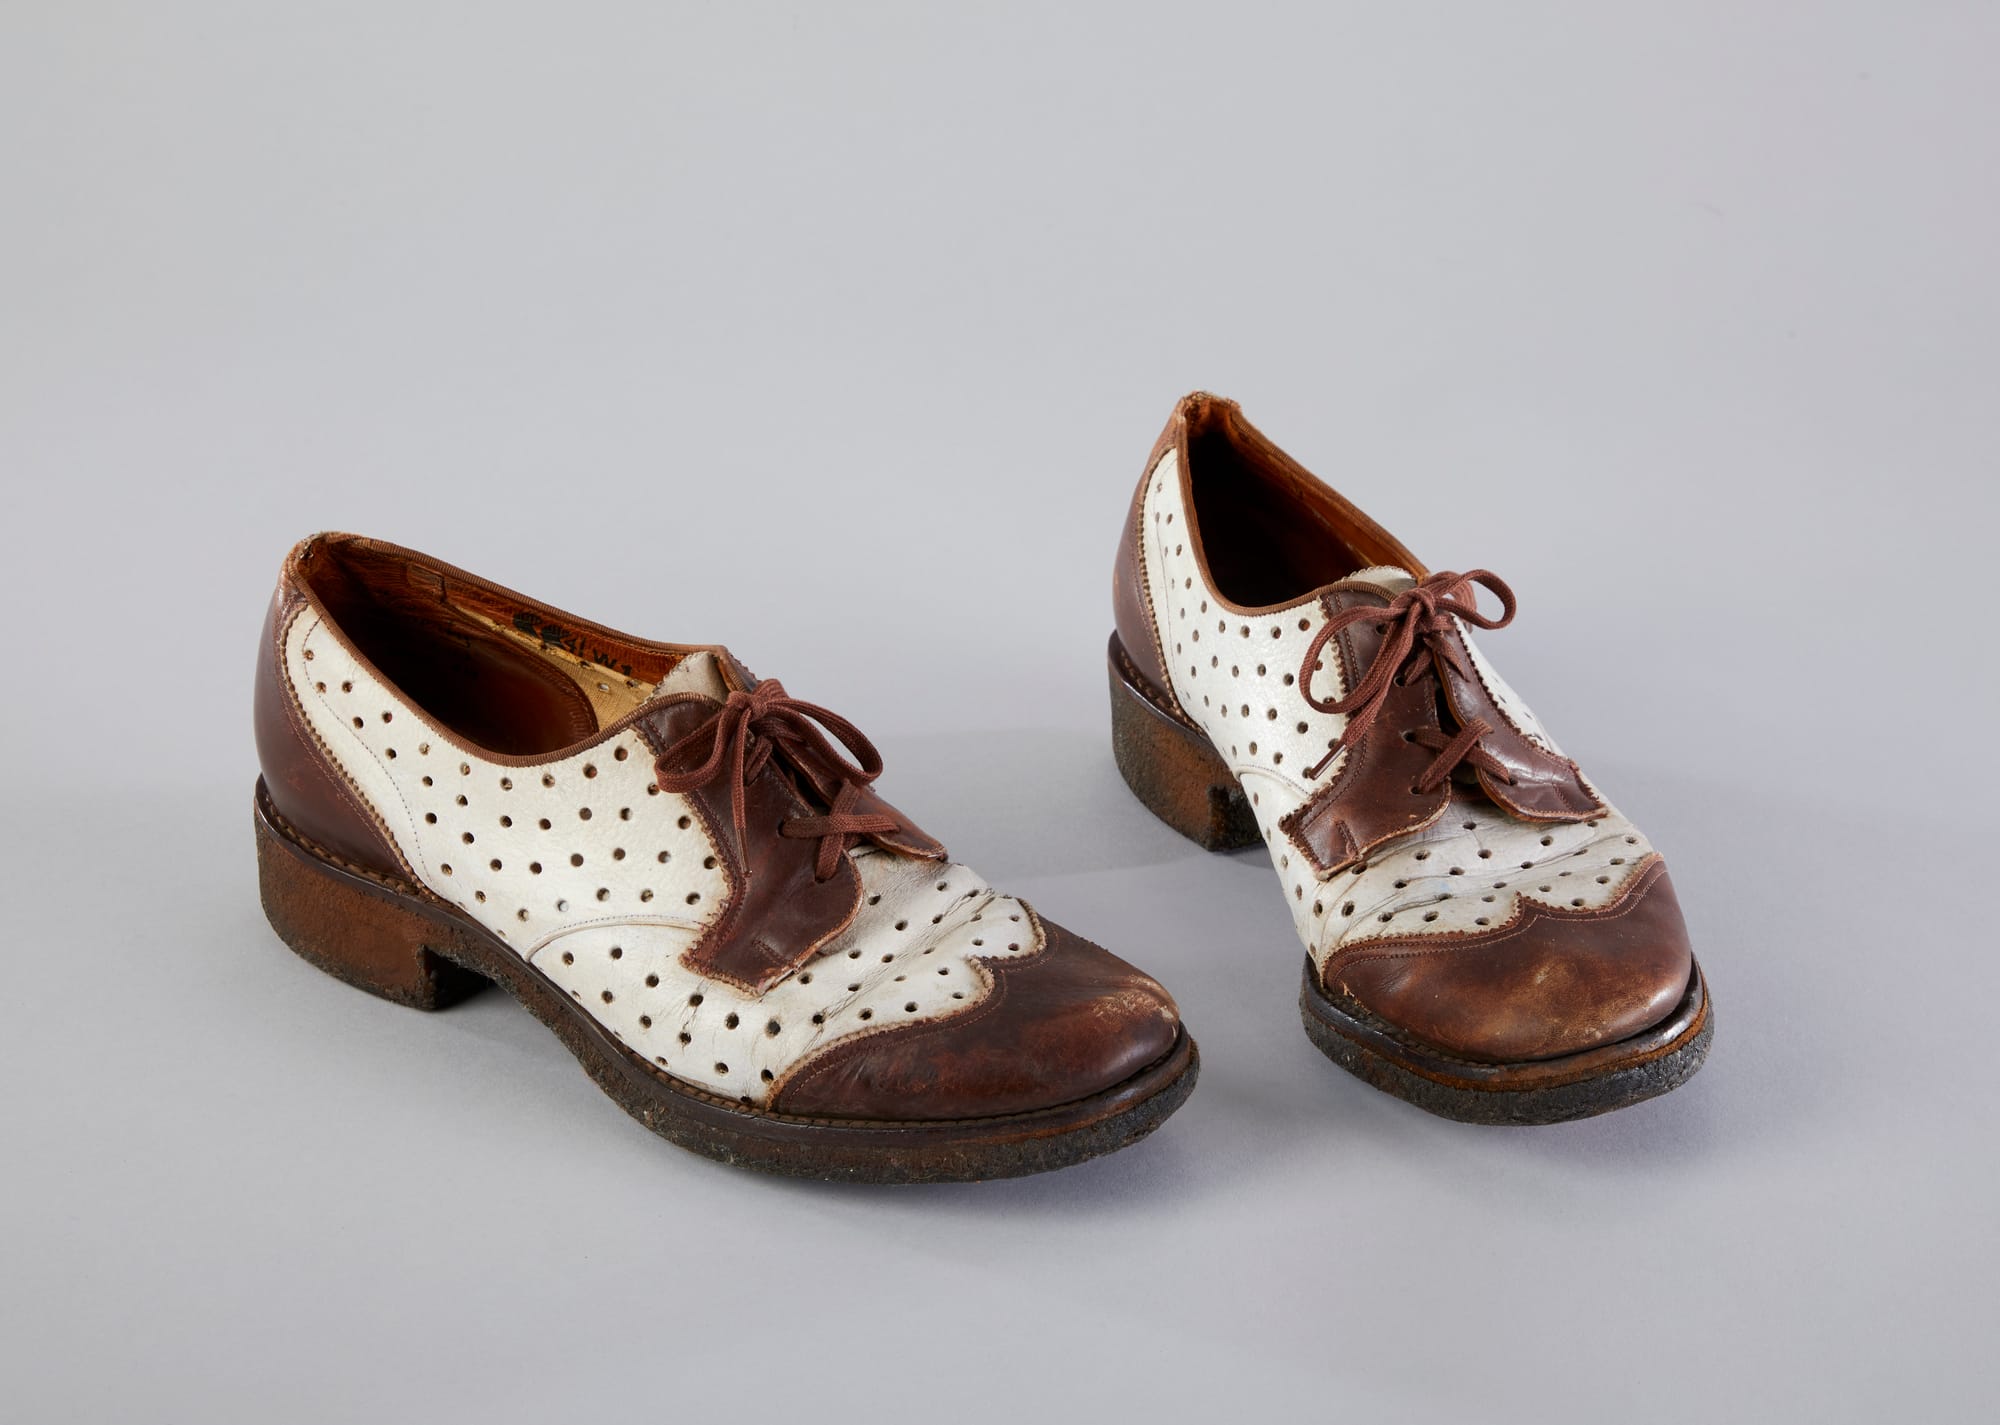 Conserving SHOES: INSIDE OUT - an interview with conservator Ruth James